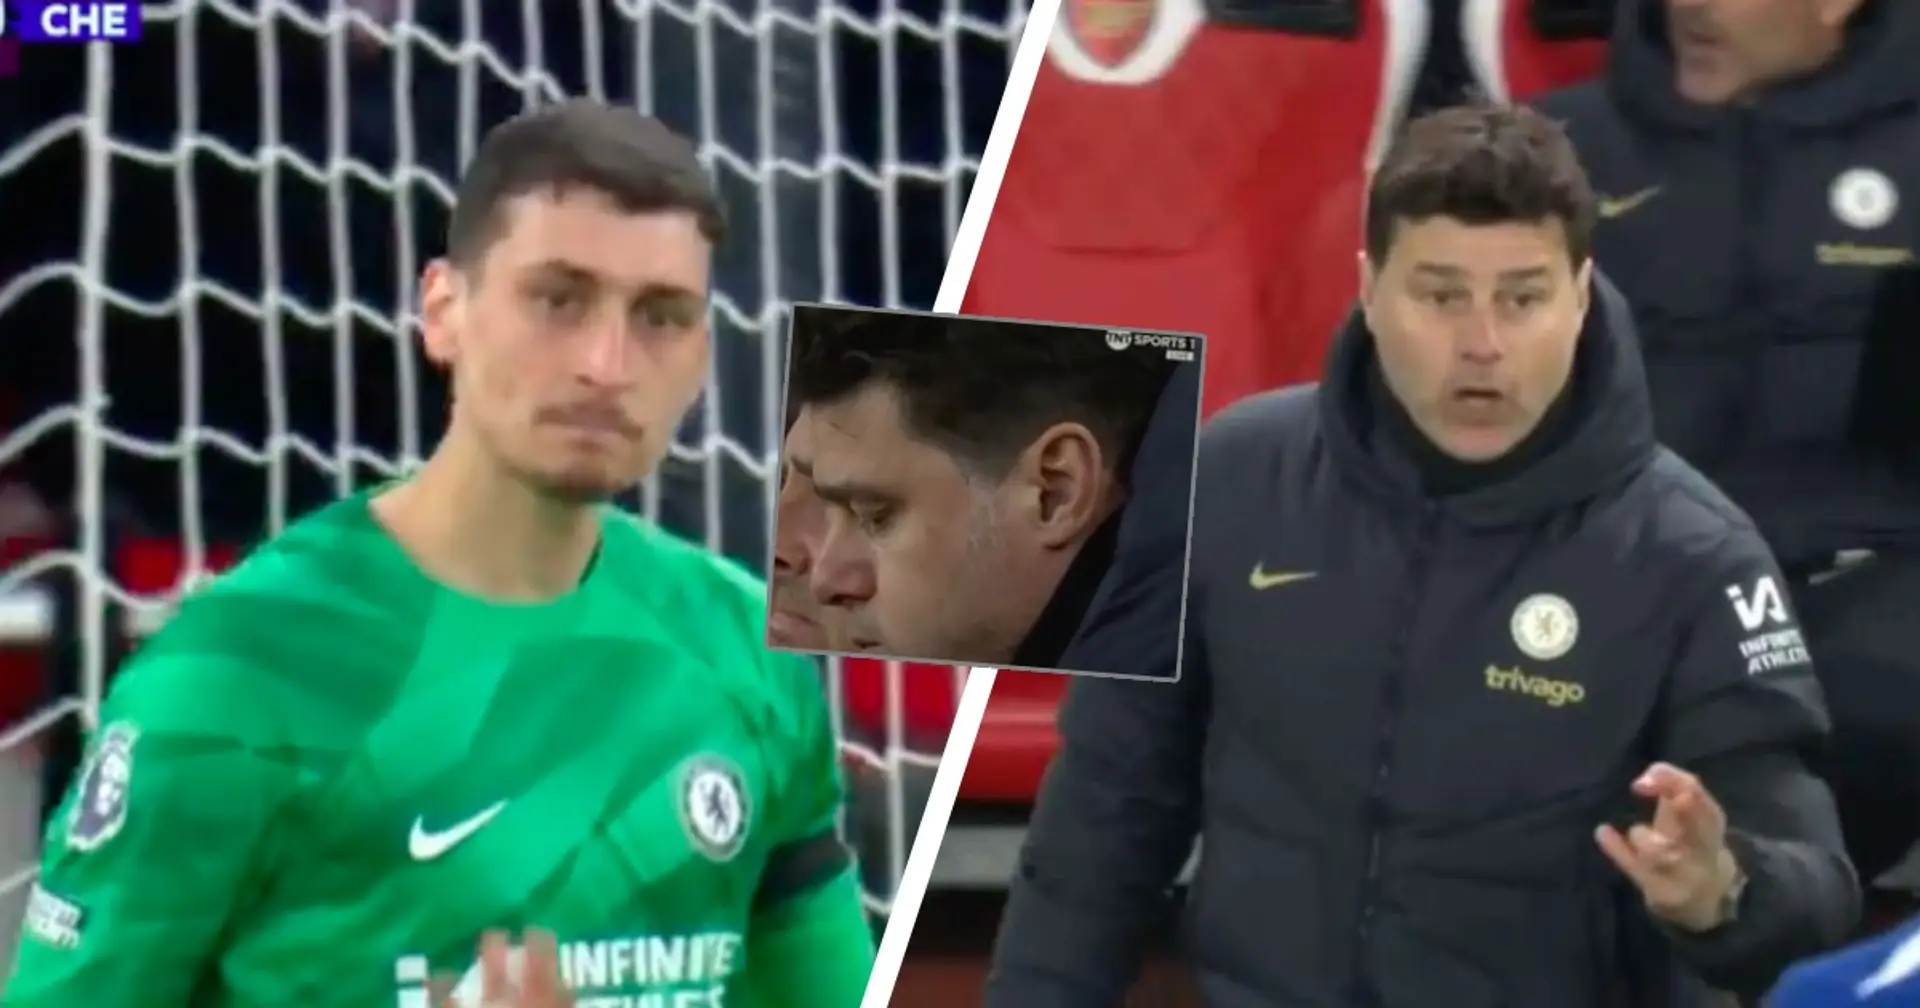 Pochettino's immediate reaction to Petrovic's error that led to goal - spotted